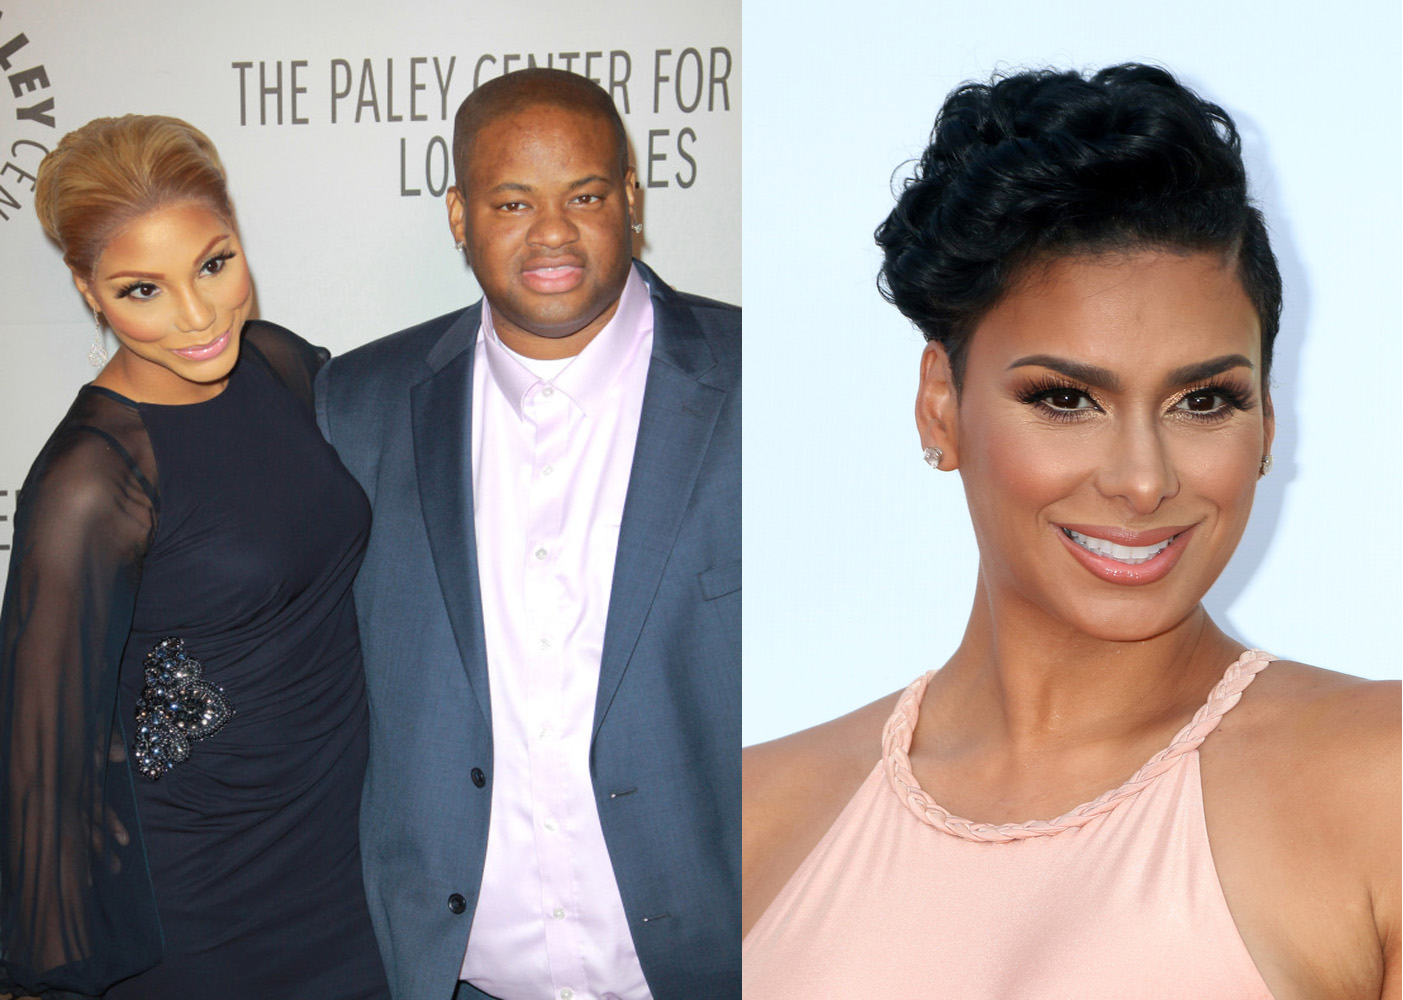 Tamar CONFIRMS Vince Cheated & Has A Baby On The Way With Another Woman Possibly "Laura Govan"